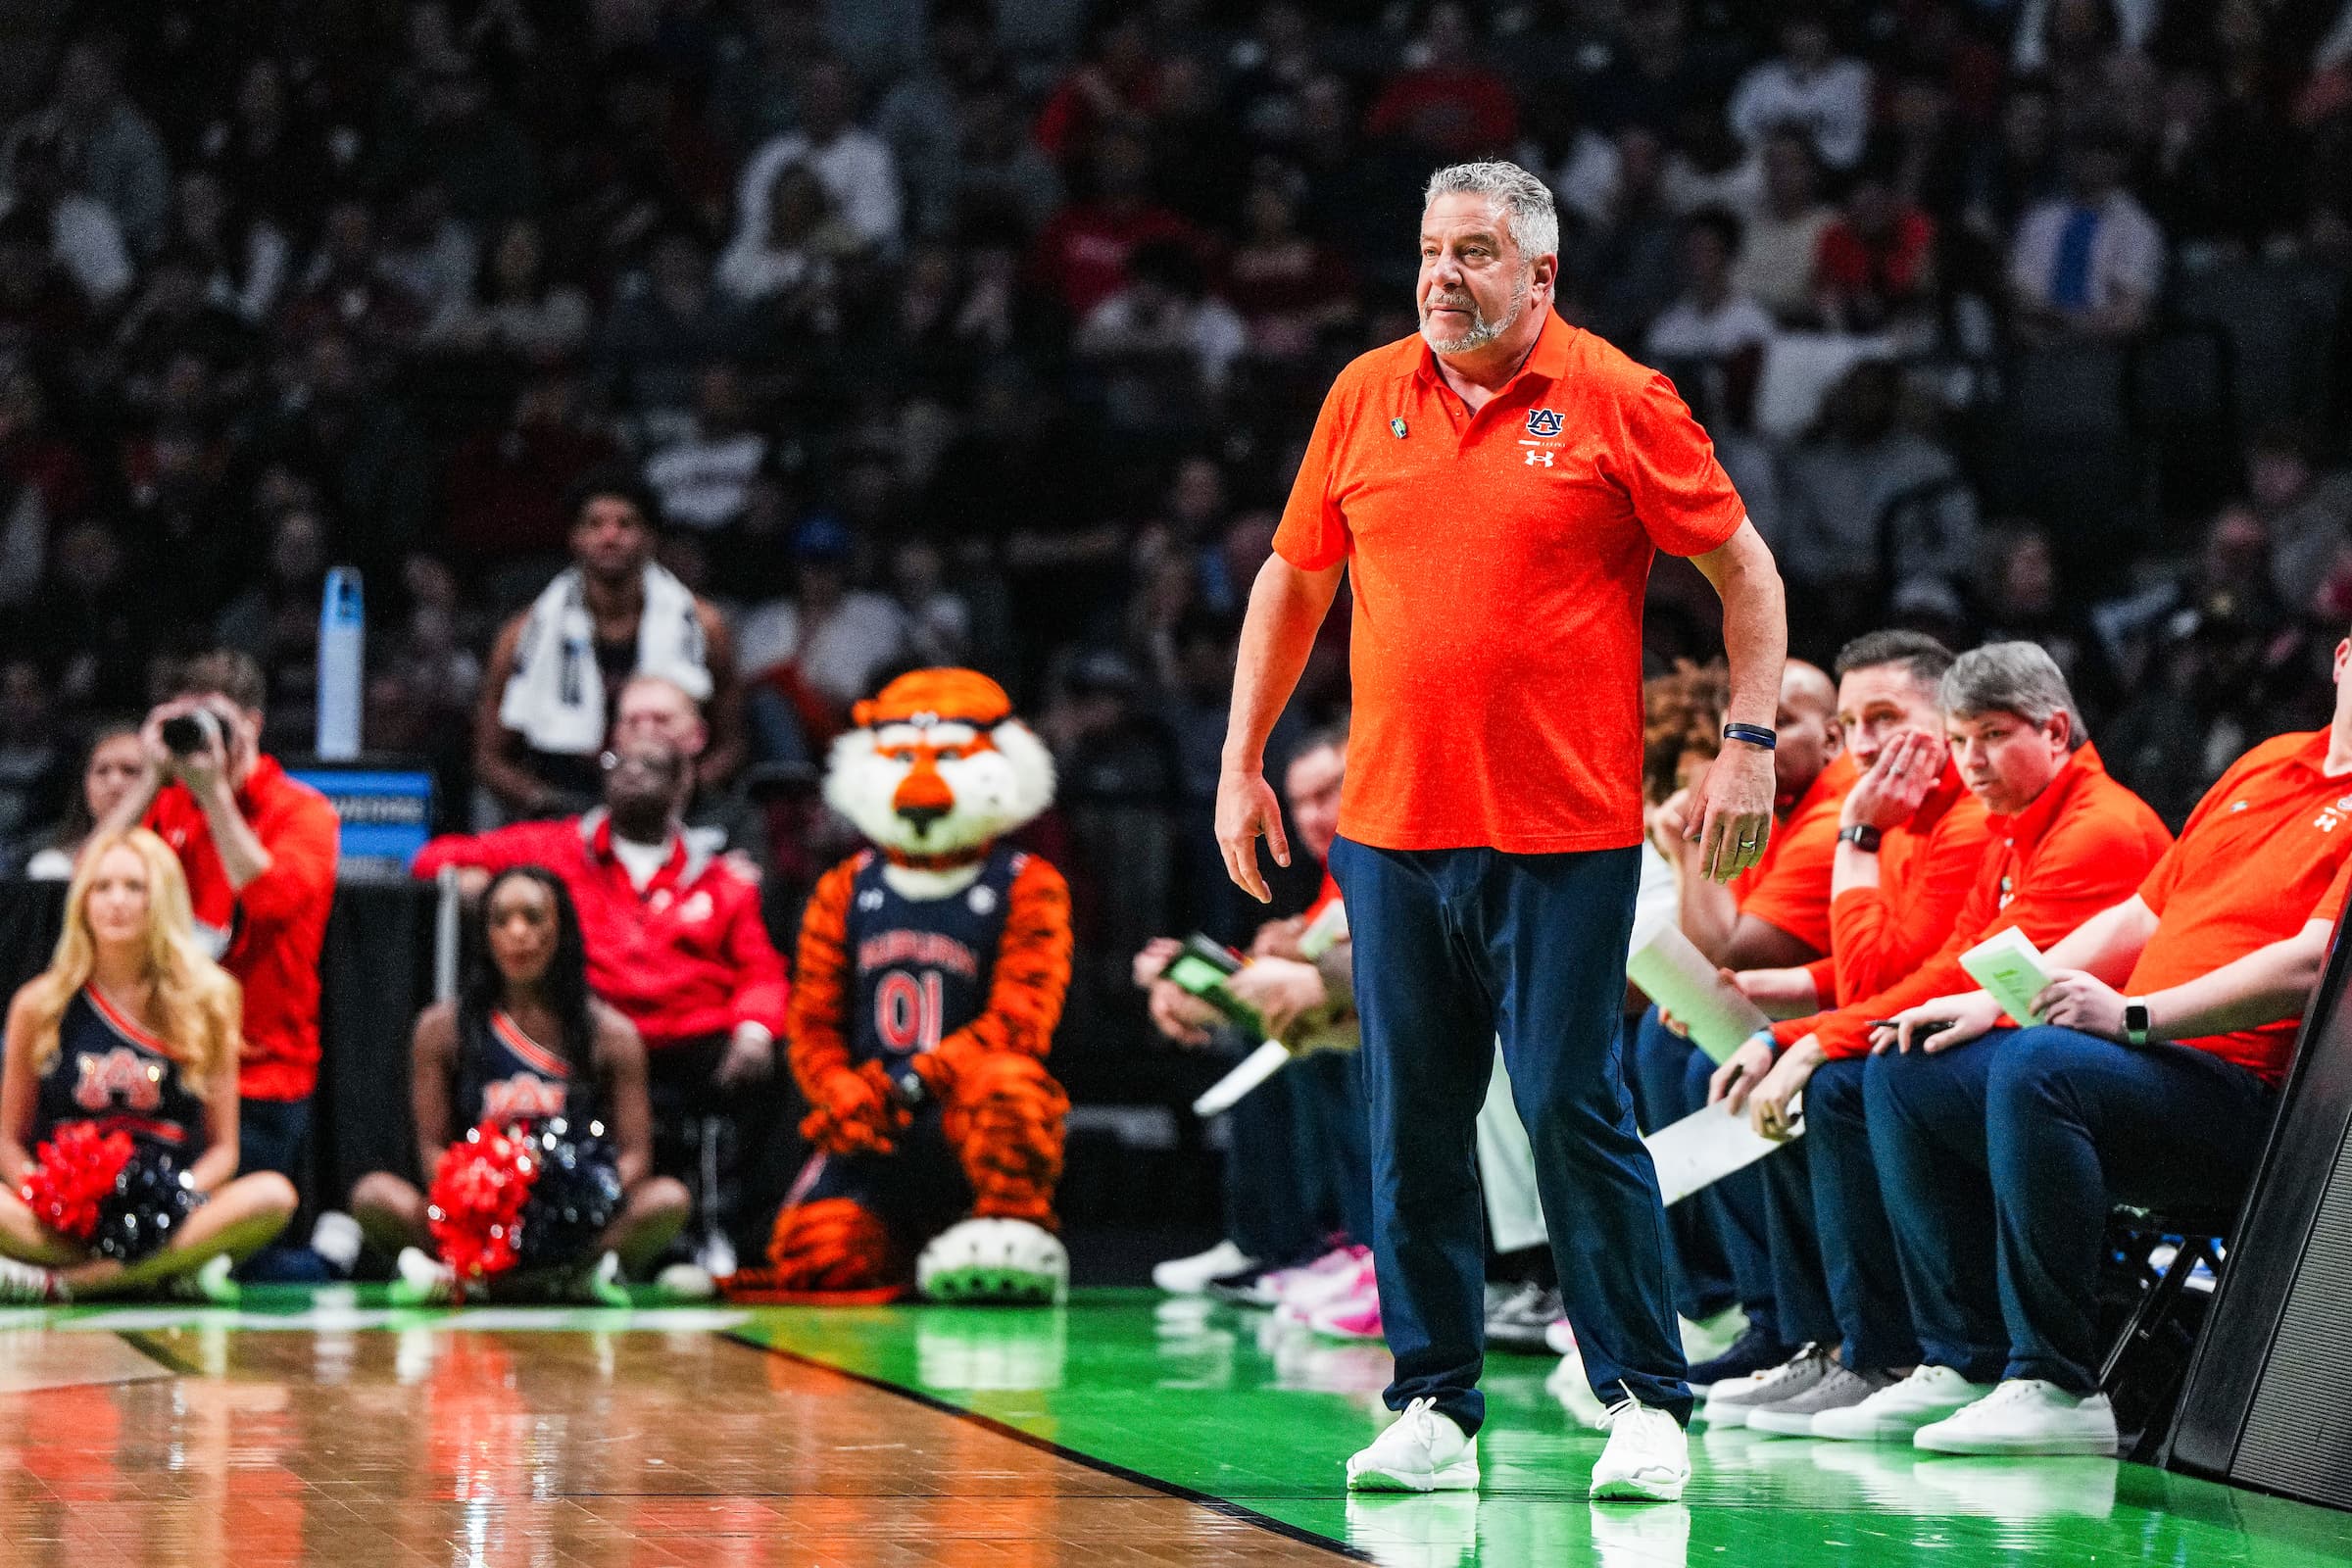 Bruce Pearl during the game between the Houstan Cougars and the Auburn Tigers at Legacy Arena in Birmingham, AL on Saturday, Mar 18, 2023. Zach Bland/Auburn Tigers